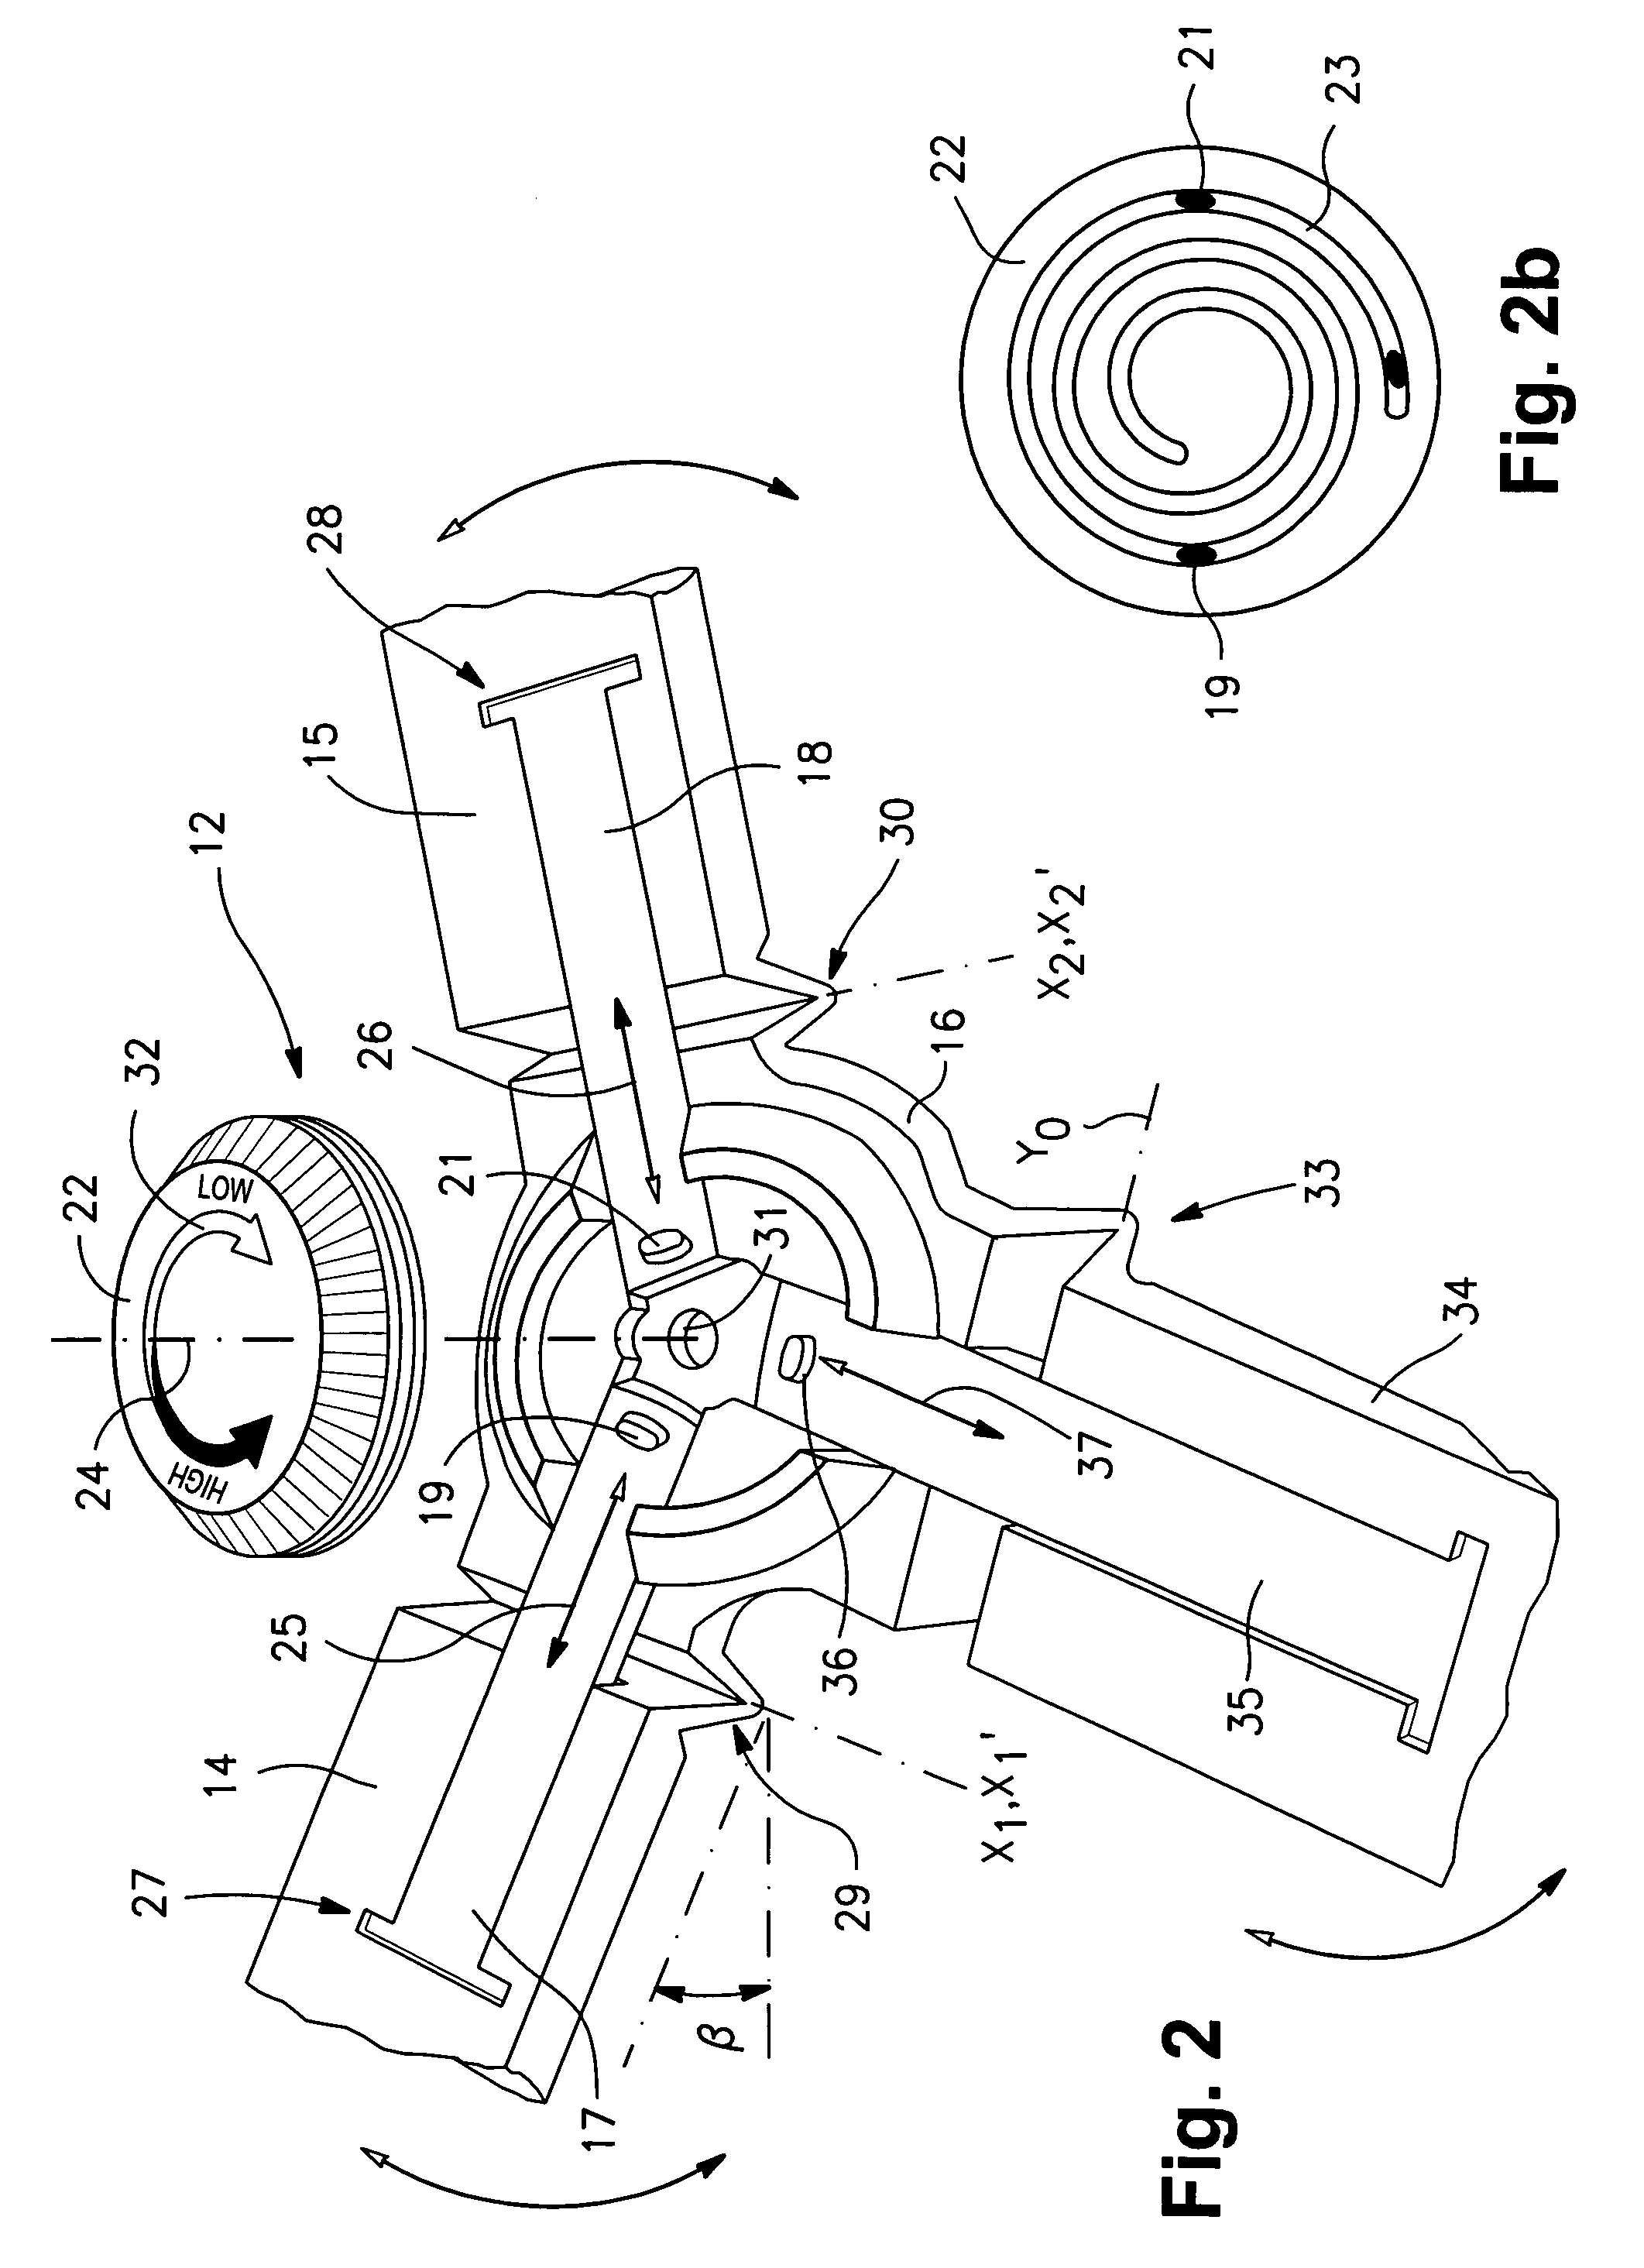 Application device for a breathing mask arrangement